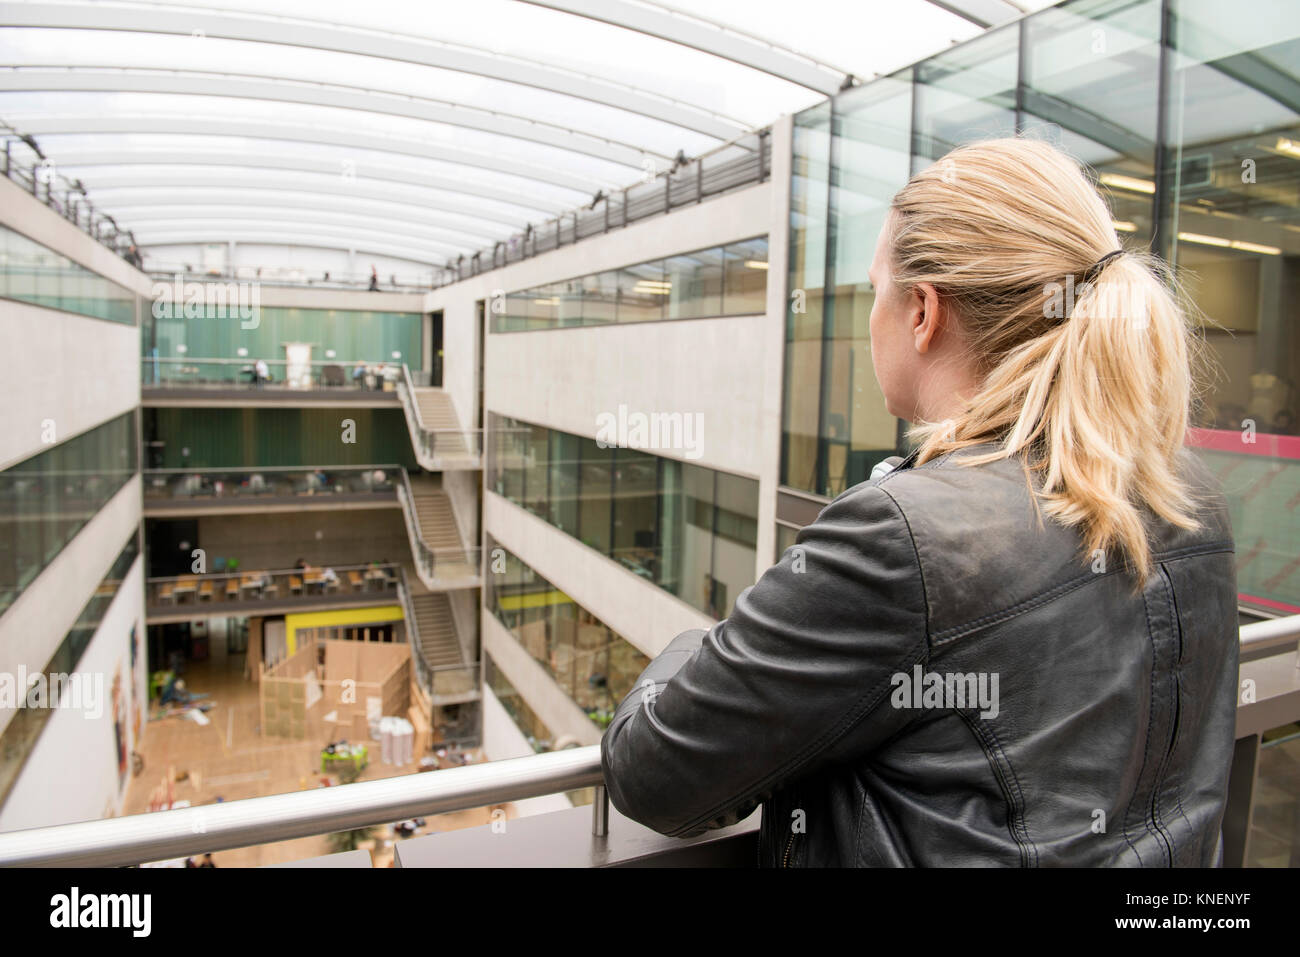 Rear view of woman on mezzanine of office building Stock Photo